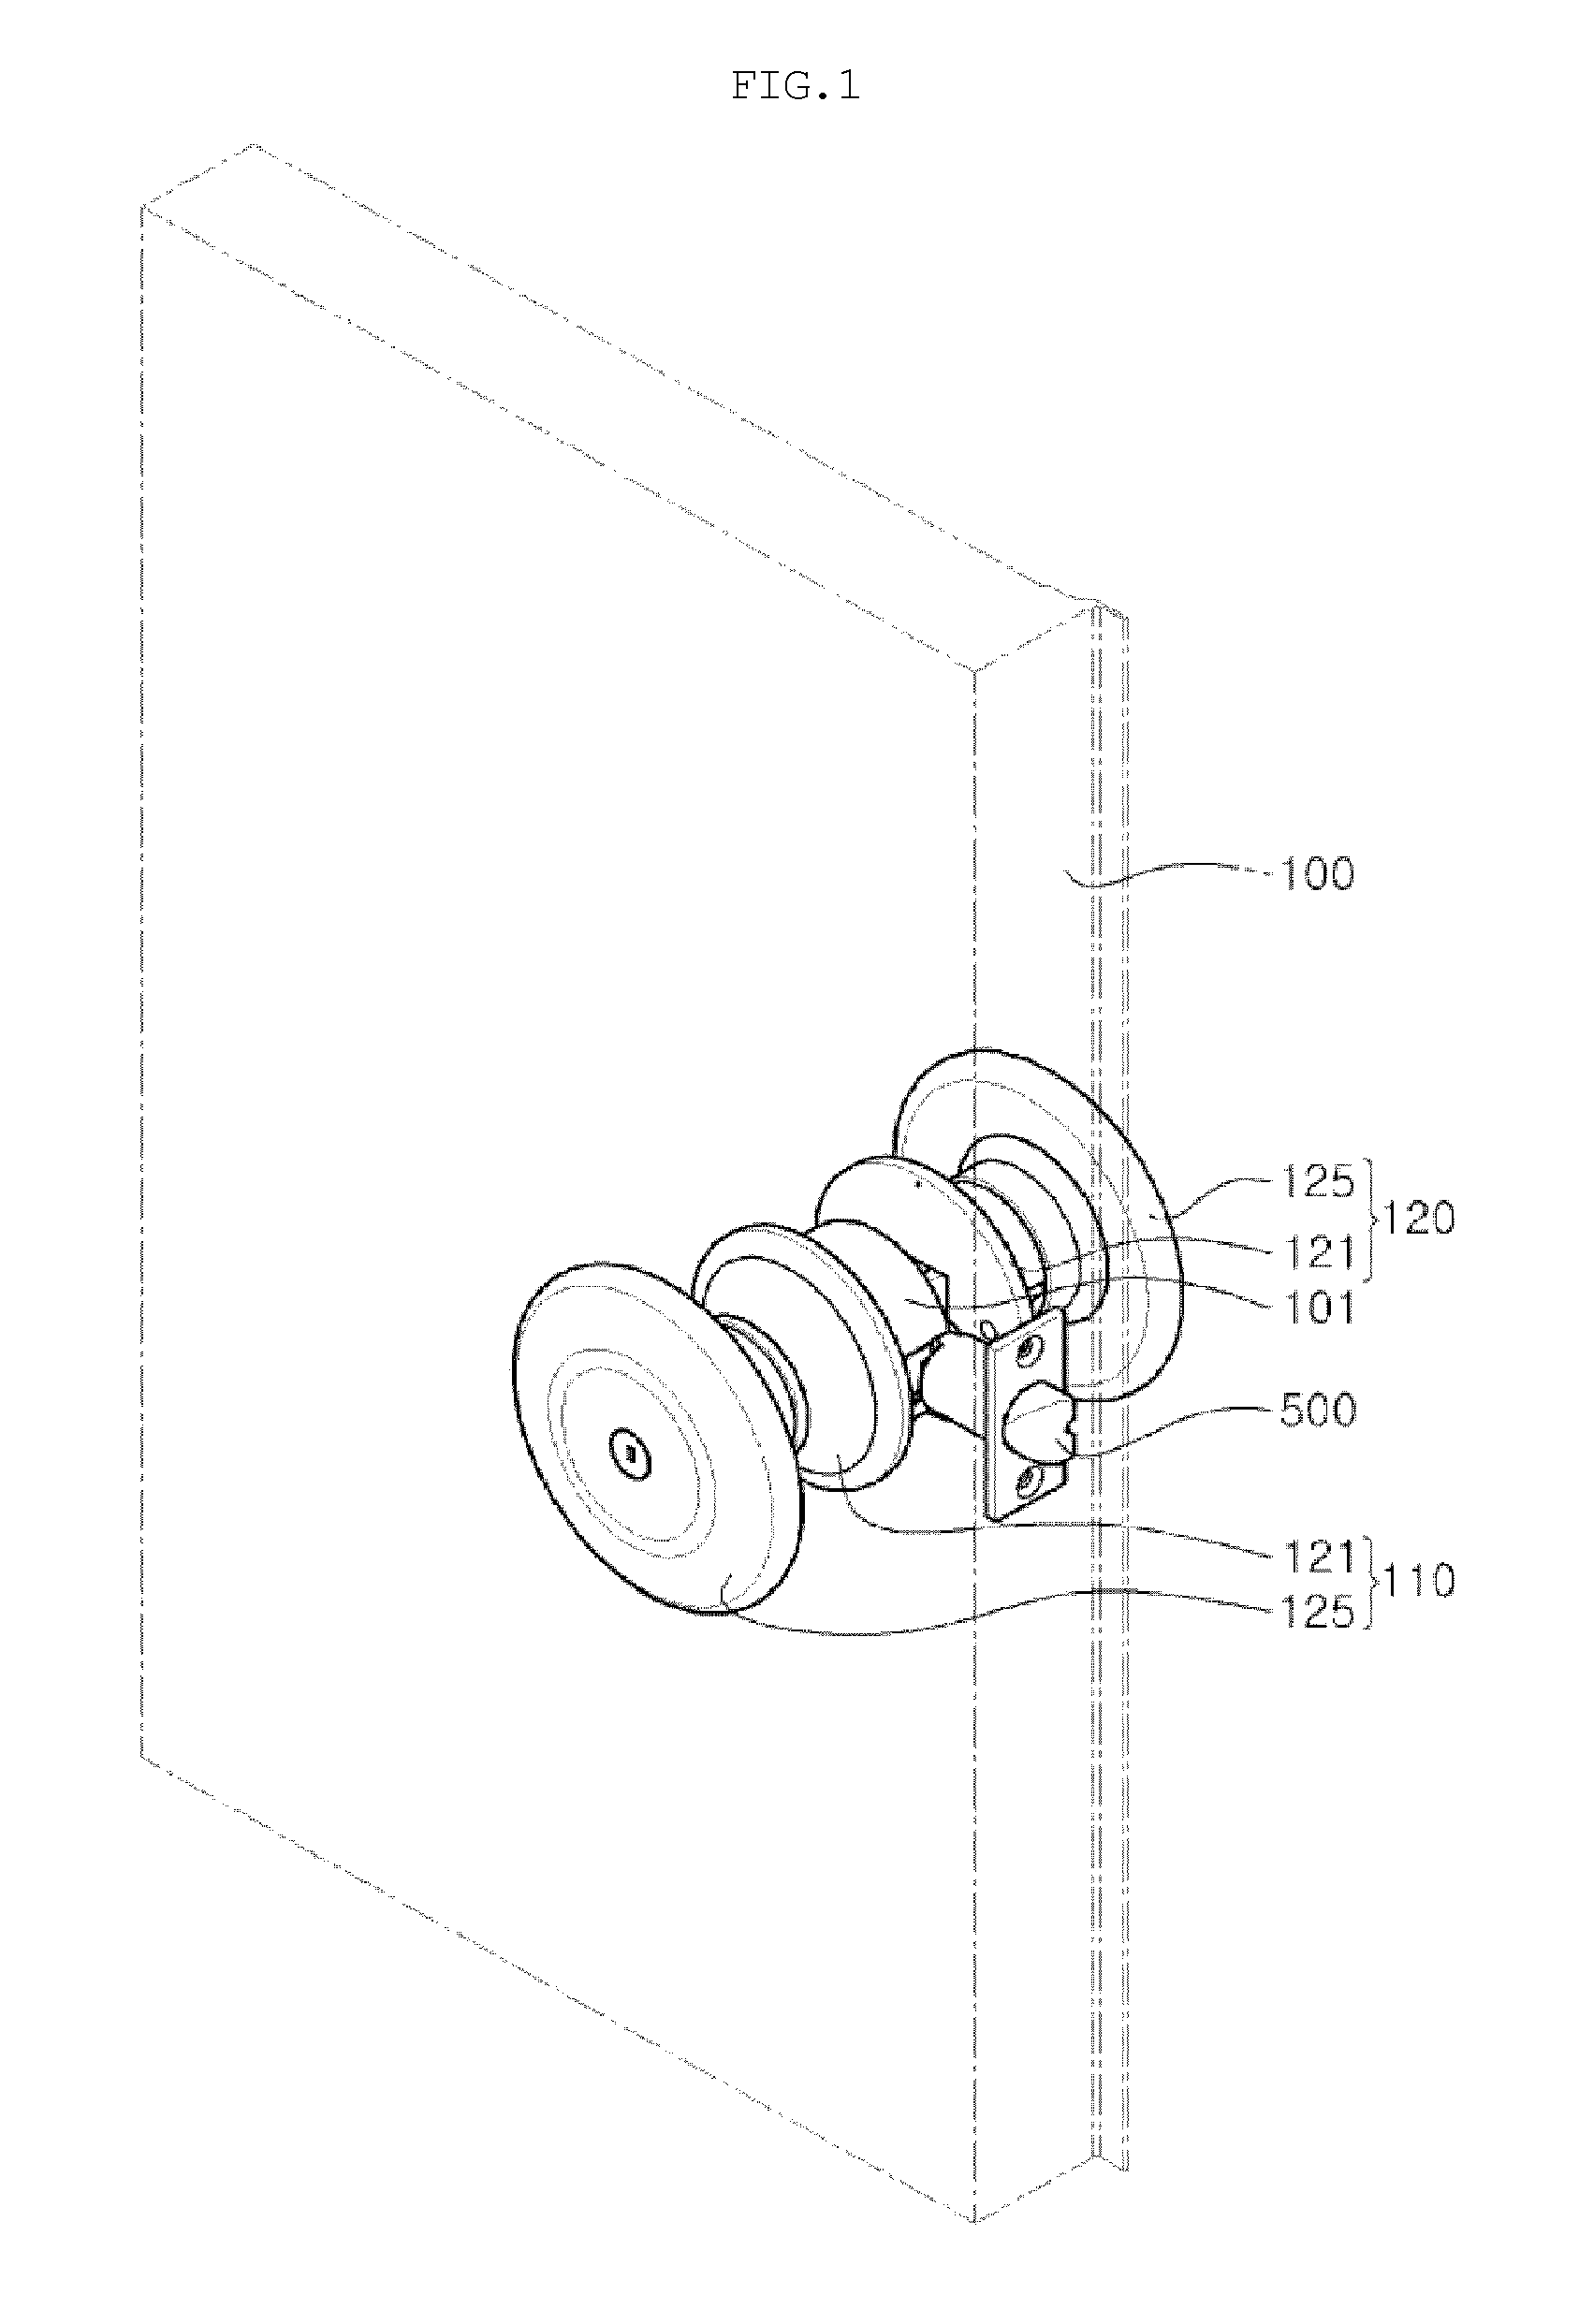 Apparatus for opening and closing entrance